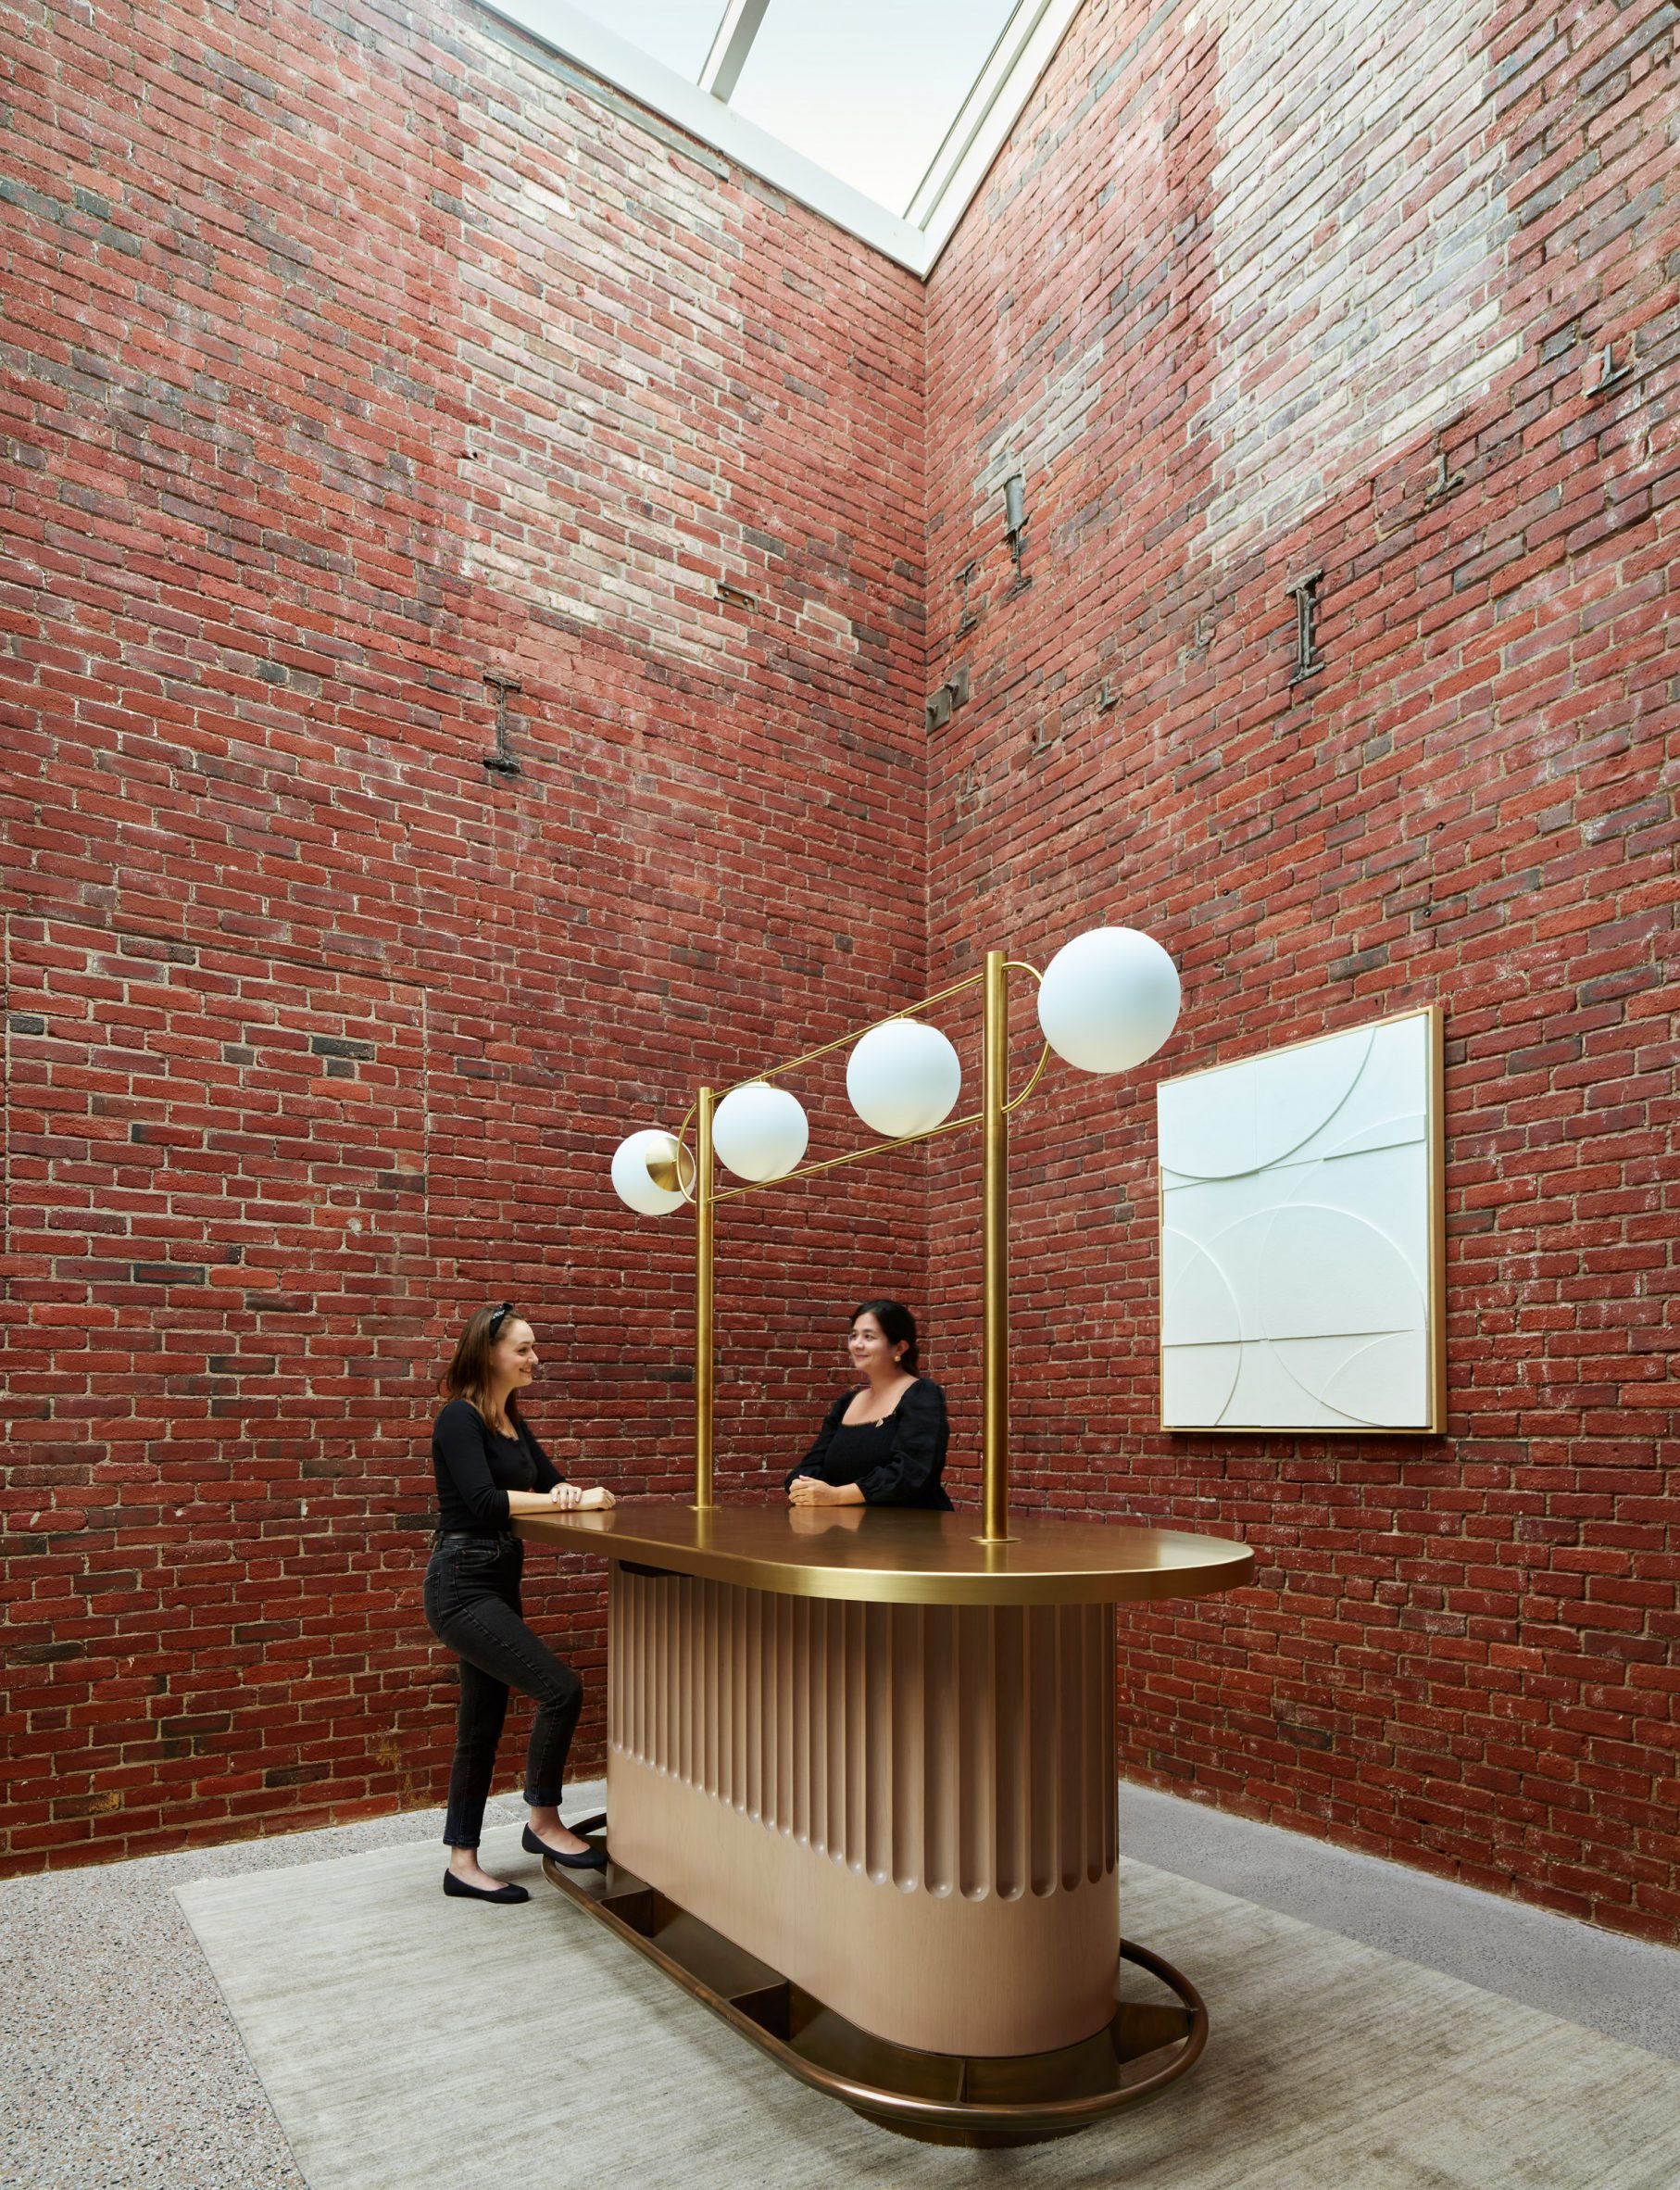 Brass counter surrounded by tall brick walls beneath a skylight